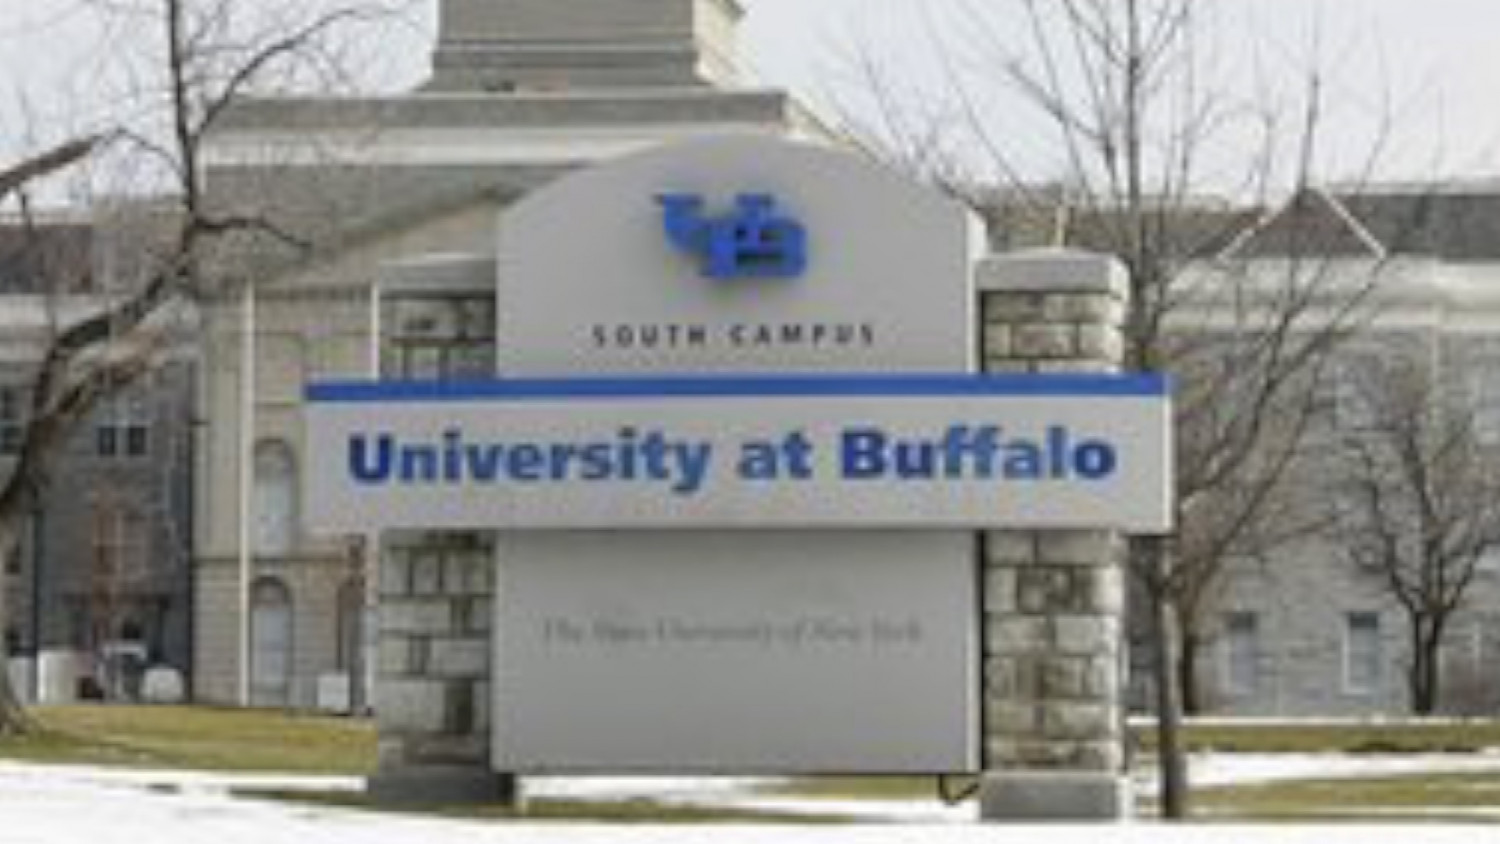 Conservative Student Group Accuses University at Buffalo of Silencing Them